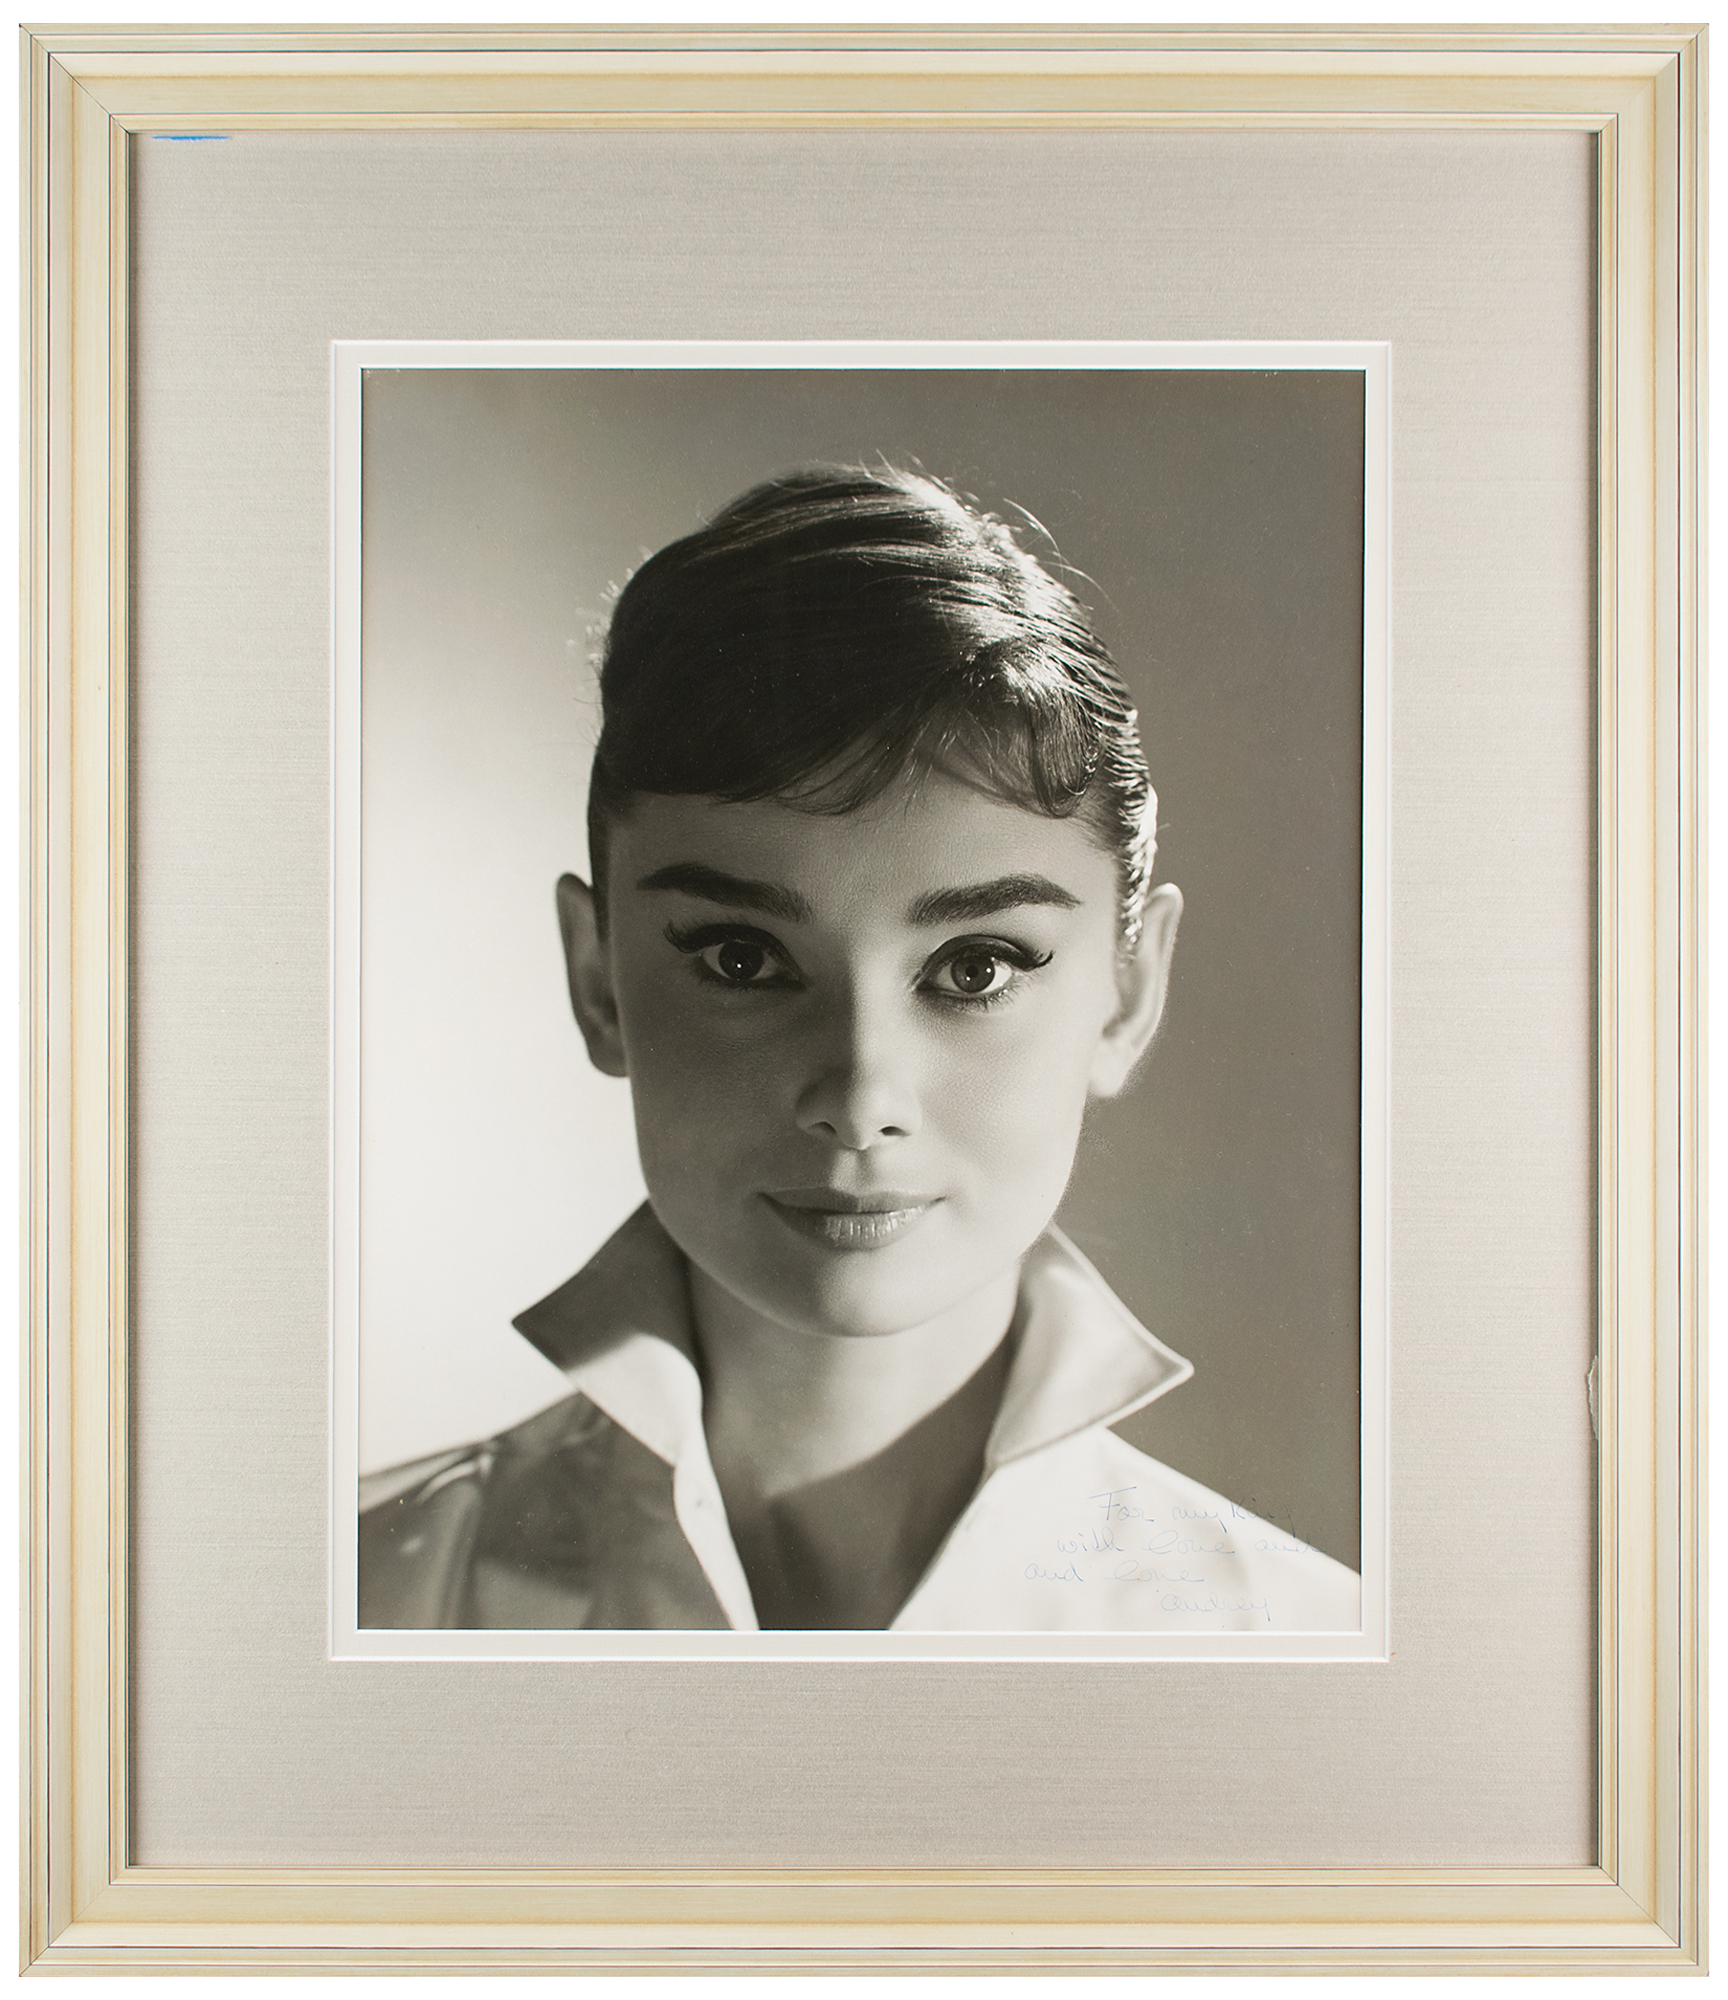 Lot #945 Audrey Hepburn Oversized Photograph Signed and Inscribed to King Vidor